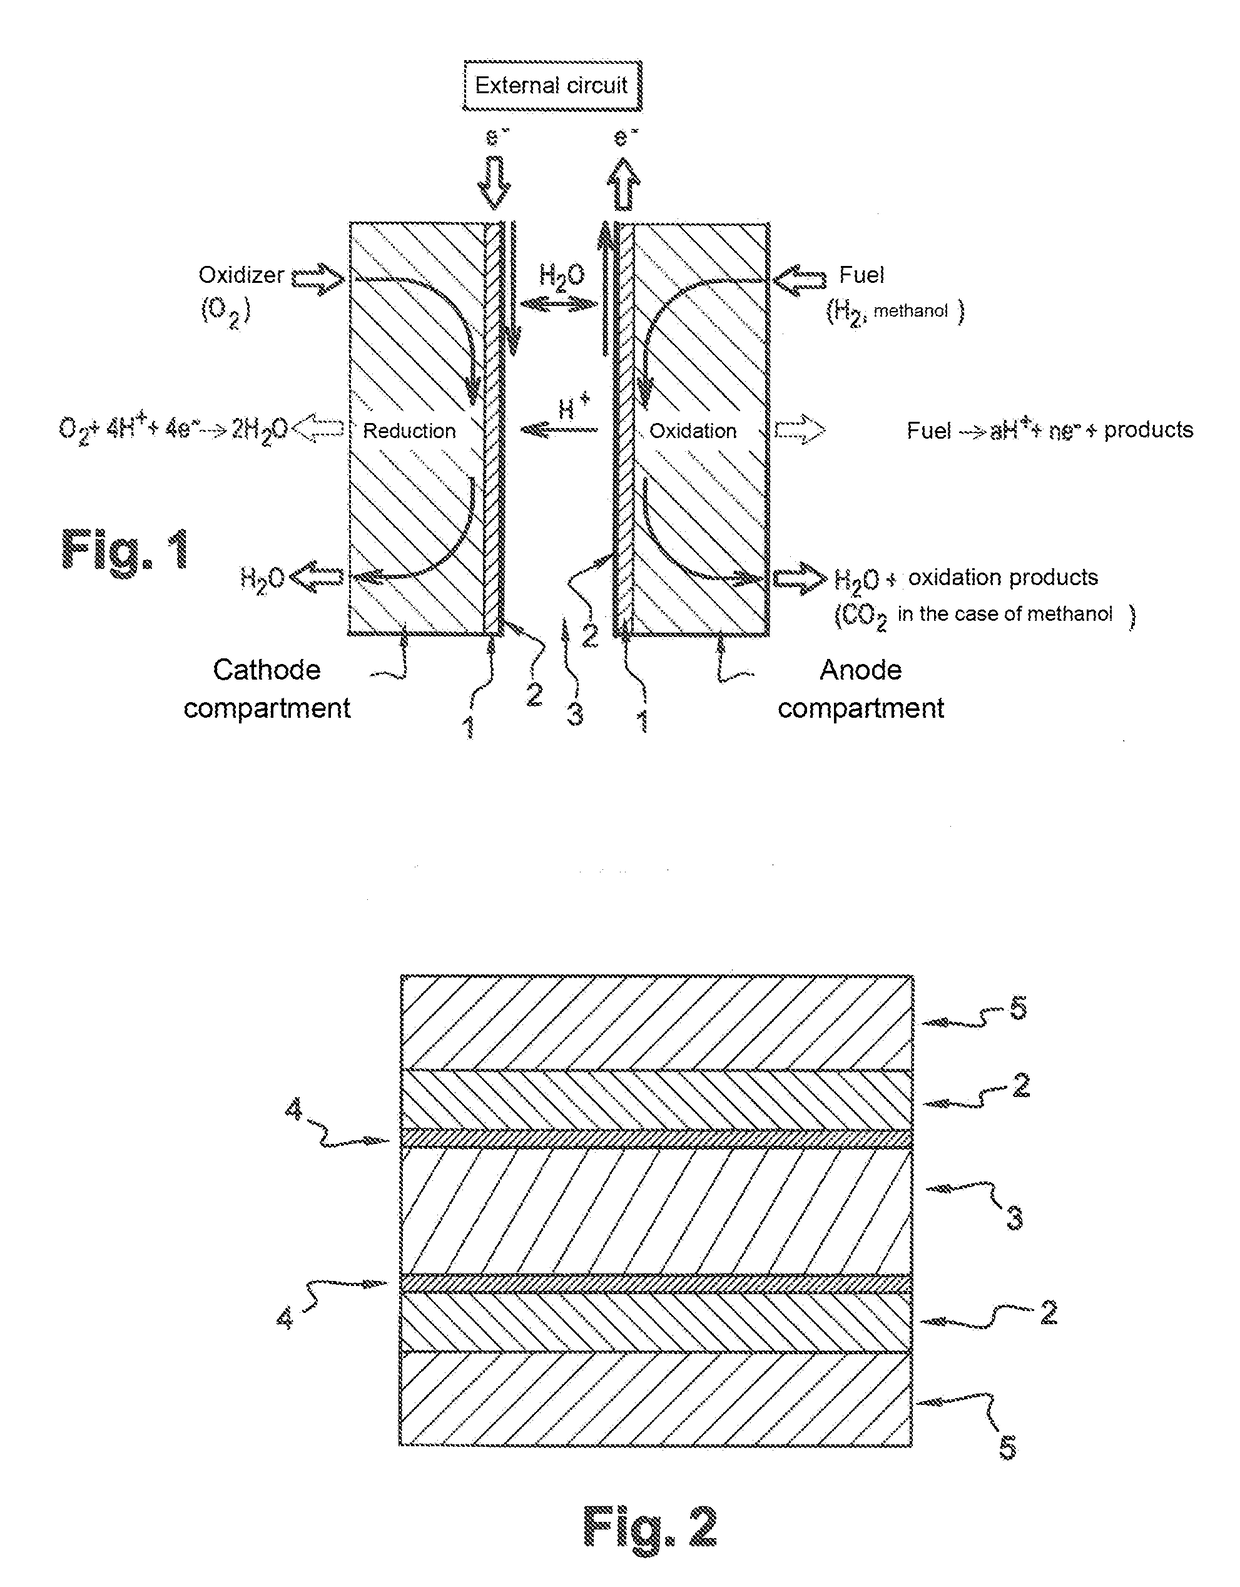 Membrane-electrodes assembly for proton exchange fuel cells (PEMFC), and manufacturing method